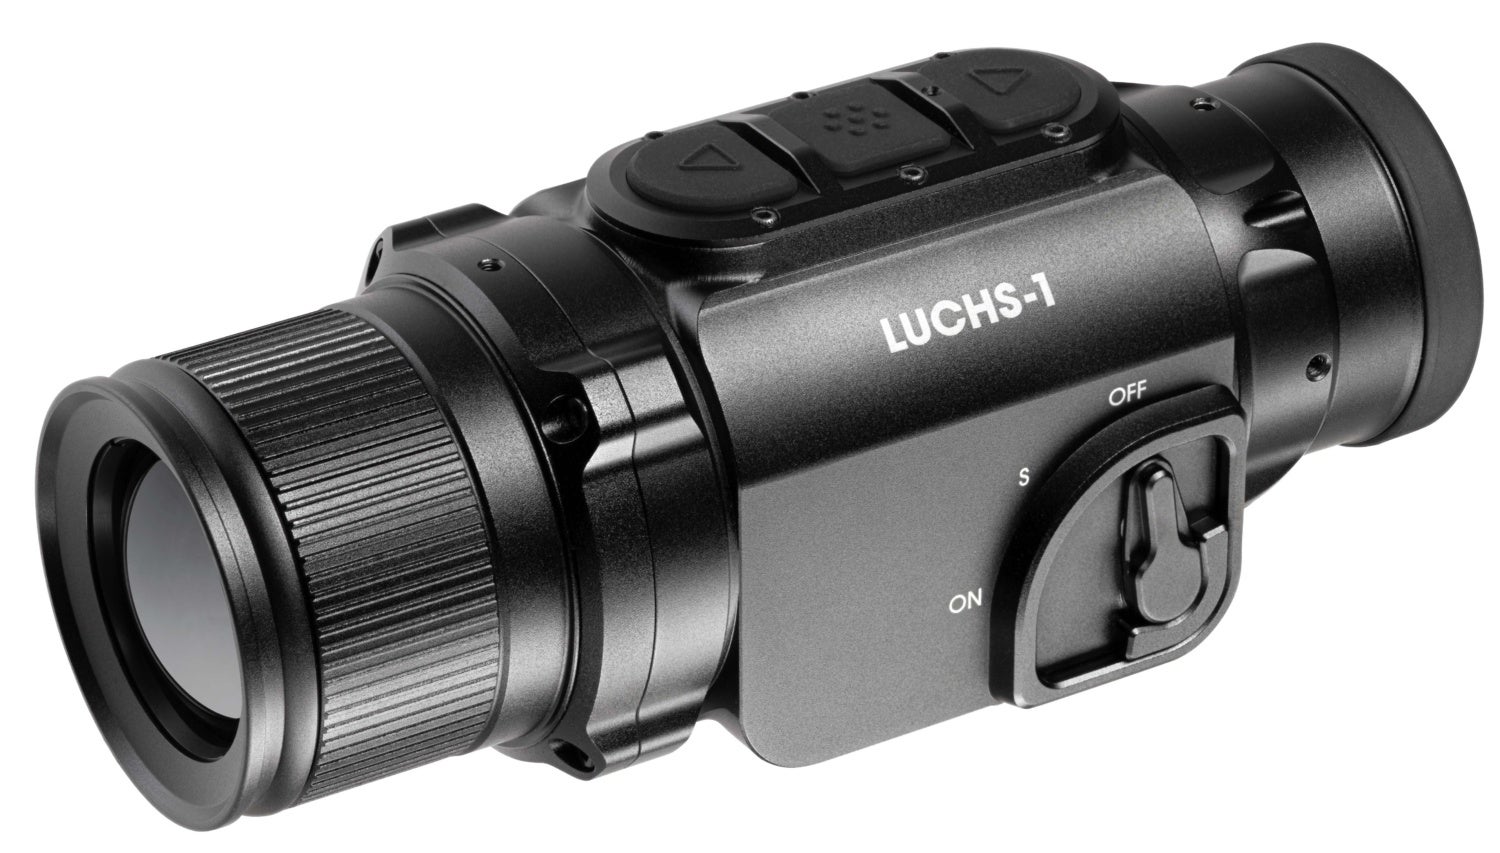 Introducing German-made Liemke's Luchs-1 and Luchs-2 Thermal Optics